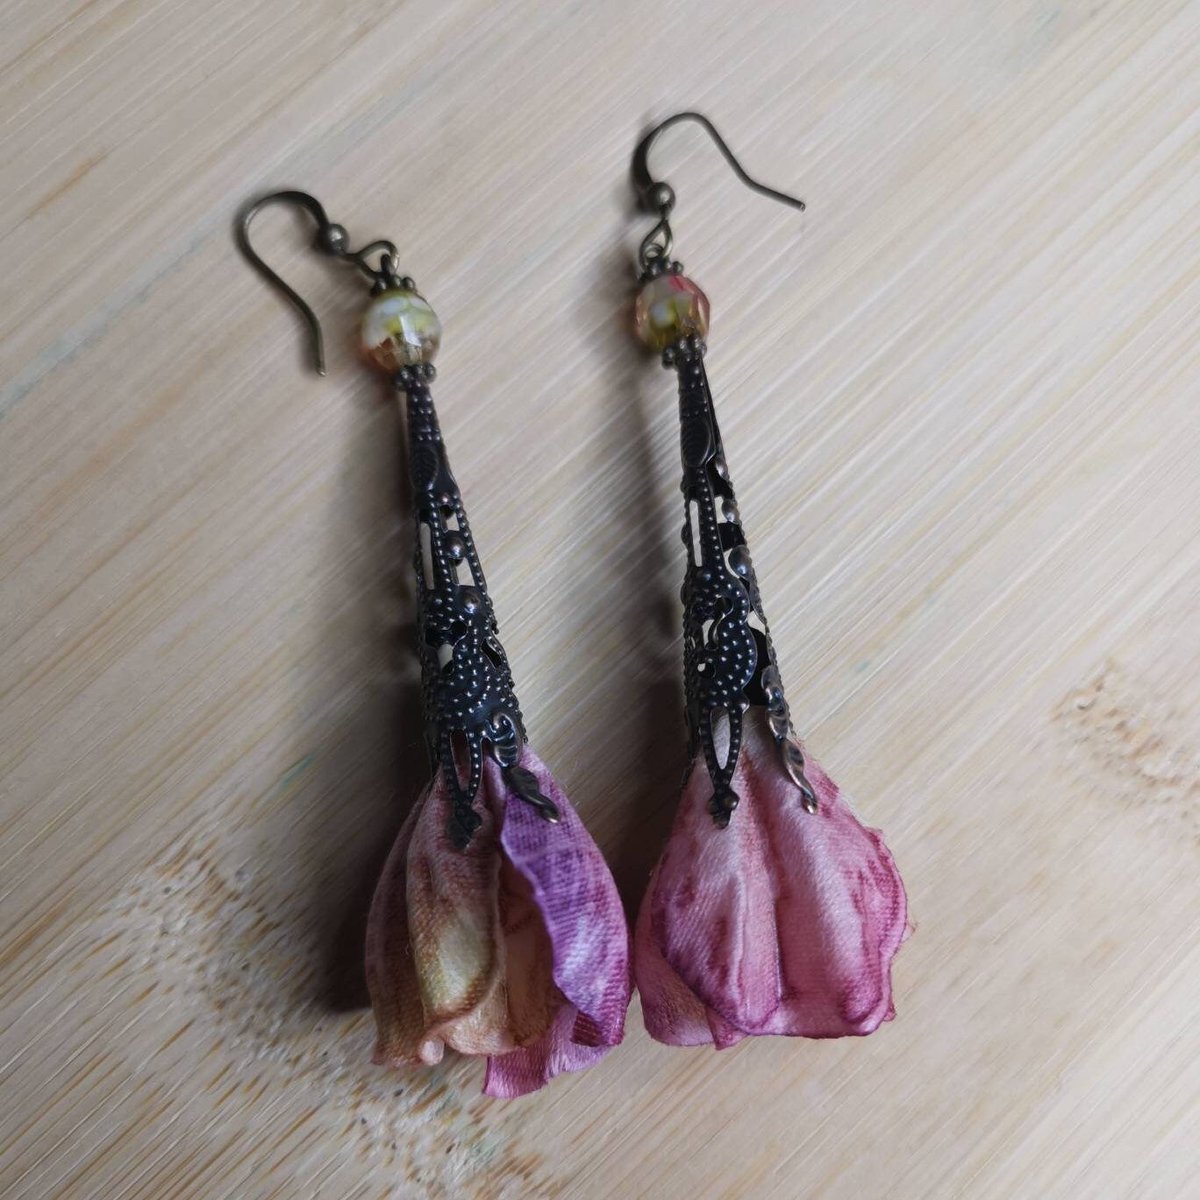 Excited to share the latest addition to my #etsy shop: Dusty Rose Fairy Flower Earrings #upcycled #statementearring #giftsforher #weddingearrings #bridesmaidearrings #cuteearrings #flowerjewelry #floraljewelry #bridalearrings etsy.me/3k6c3yO